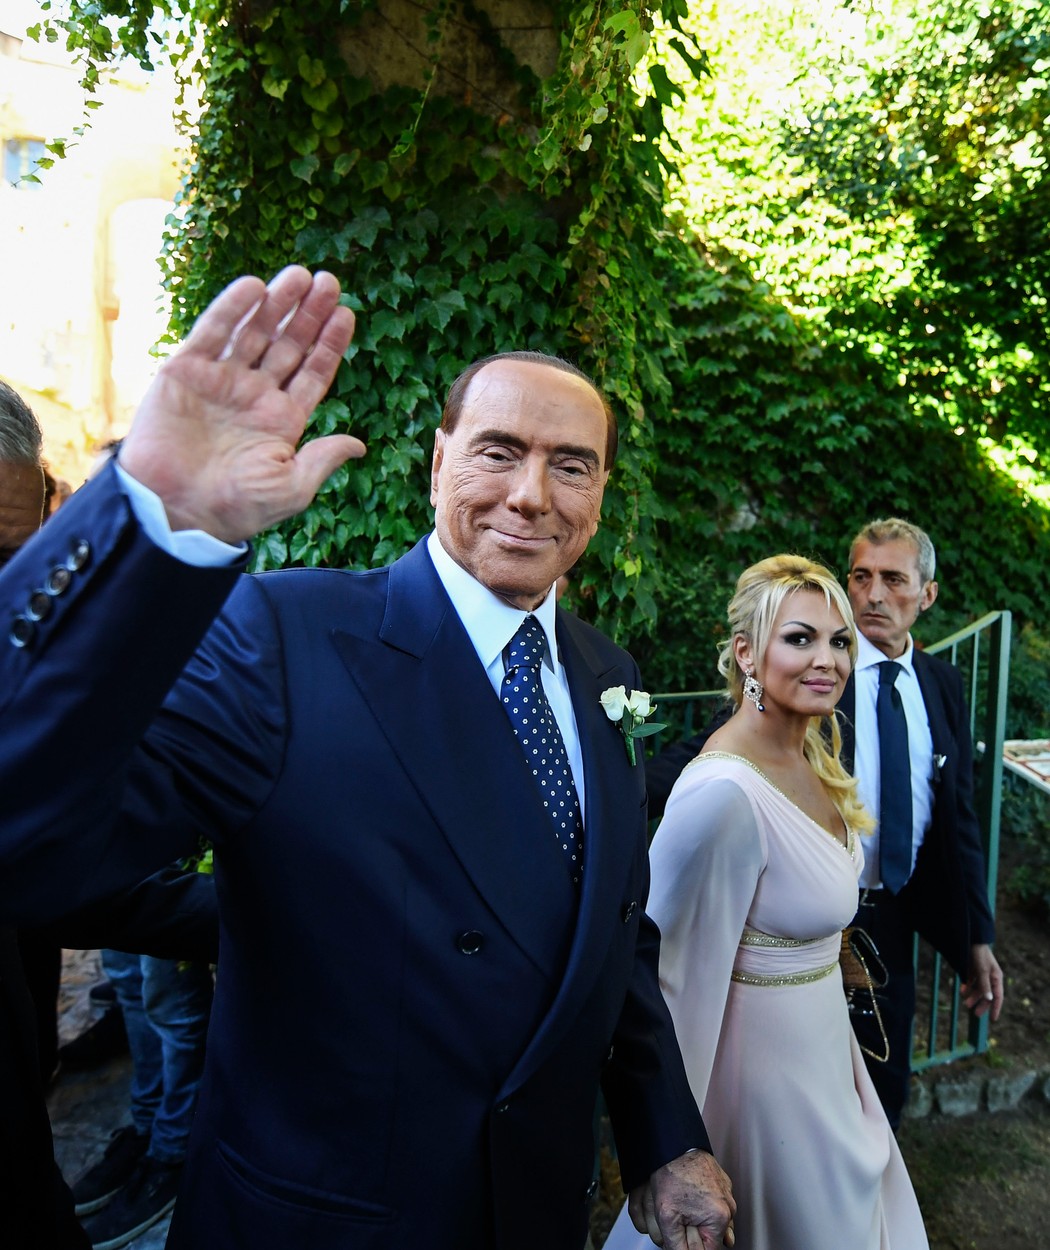 Silvio Berlusconi and Francesca Pascale in Ravello, at the wedding of her sister Marianna Pascale. 13/10/2017, Ravello, Italy,Image: 352816767, License: Rights-managed, Restrictions: No model/property release was granted for this image. Pursuant to law and as previously agreed by registering on this website, the company publishing this image is required to blur or pixelate the sensitive details in such a way as to make those details un, Model Release: no, Credit line: Salvatore Laporta / IPA / IPA / Profimedia